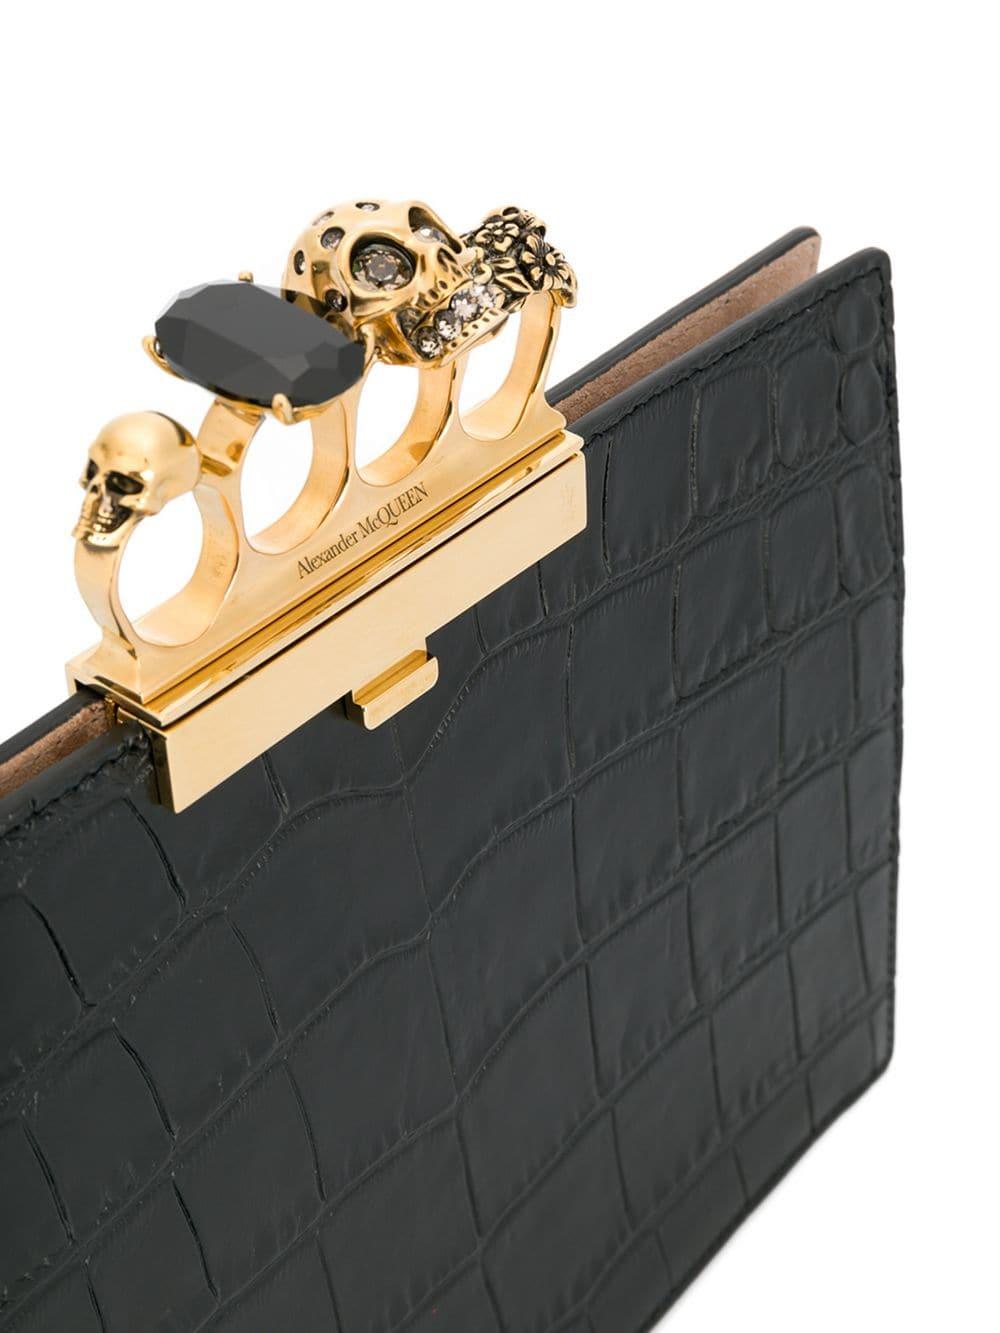 Alexander McQueen Leather Four Ring Clutch in Black Lyst